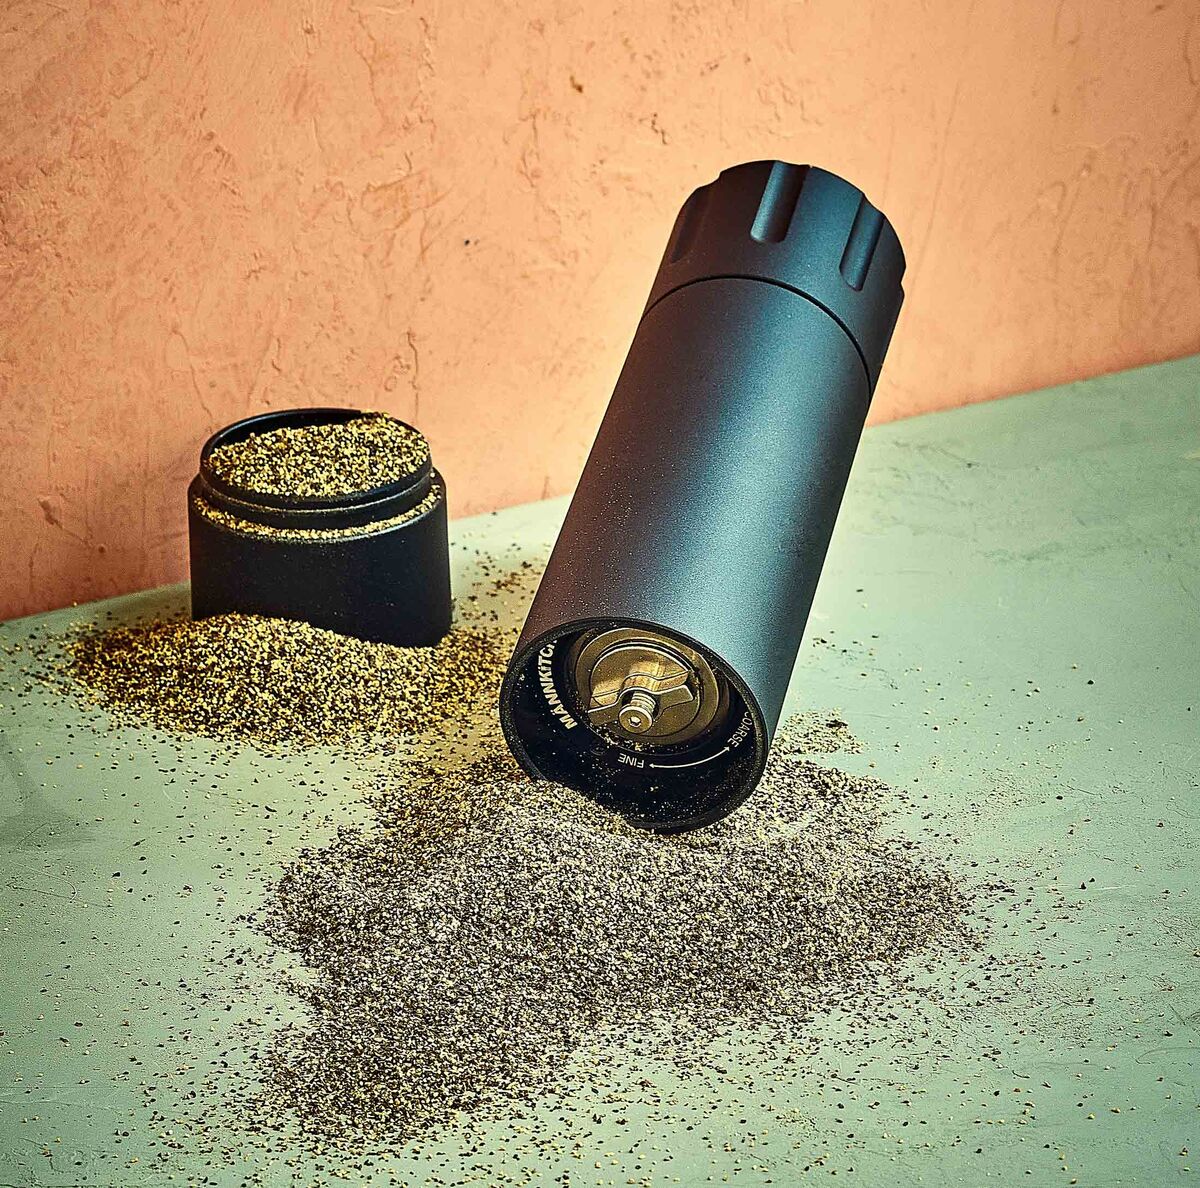 The 6 Best Pepper Grinders, According to Our Tests